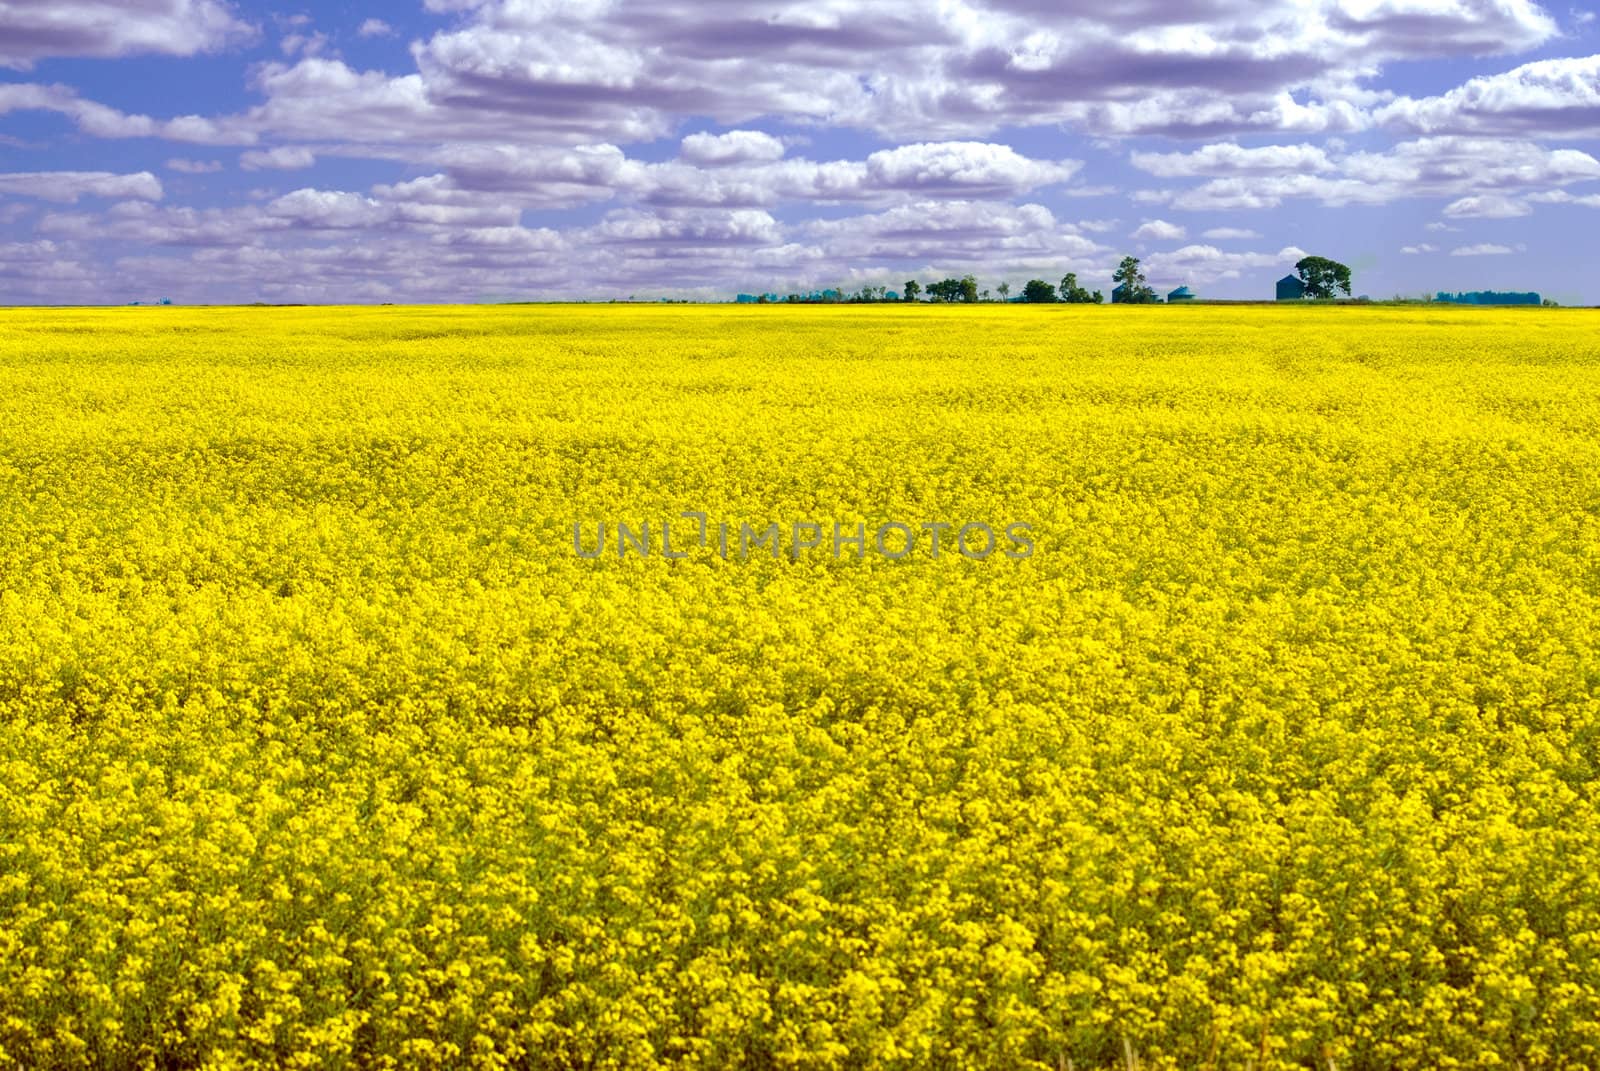 Landscape of a canola field on a partly cloudy day with lots of room for copyspace